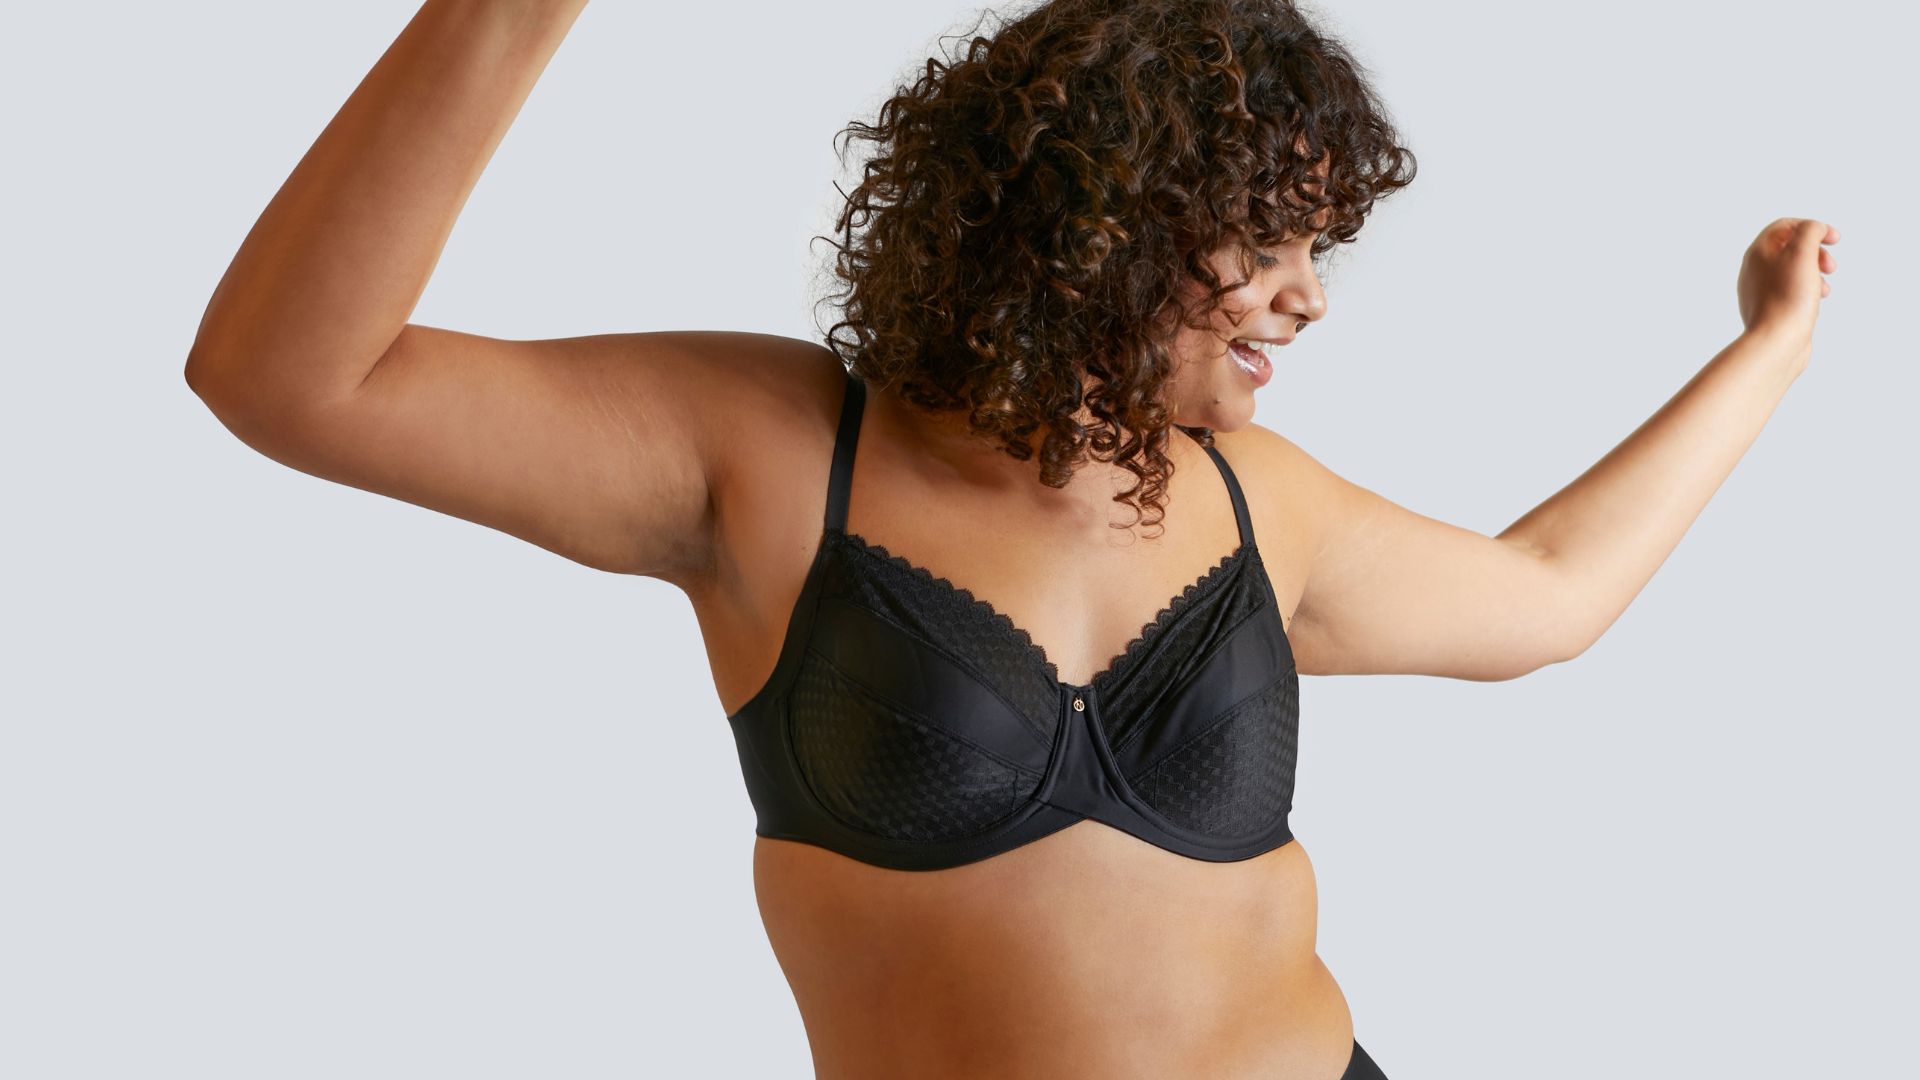 Shop the most comfortable bras from Berlei, Triumph, Fayreform, Bendon, Nancy Ganz and Playtex at Harris Scarfe